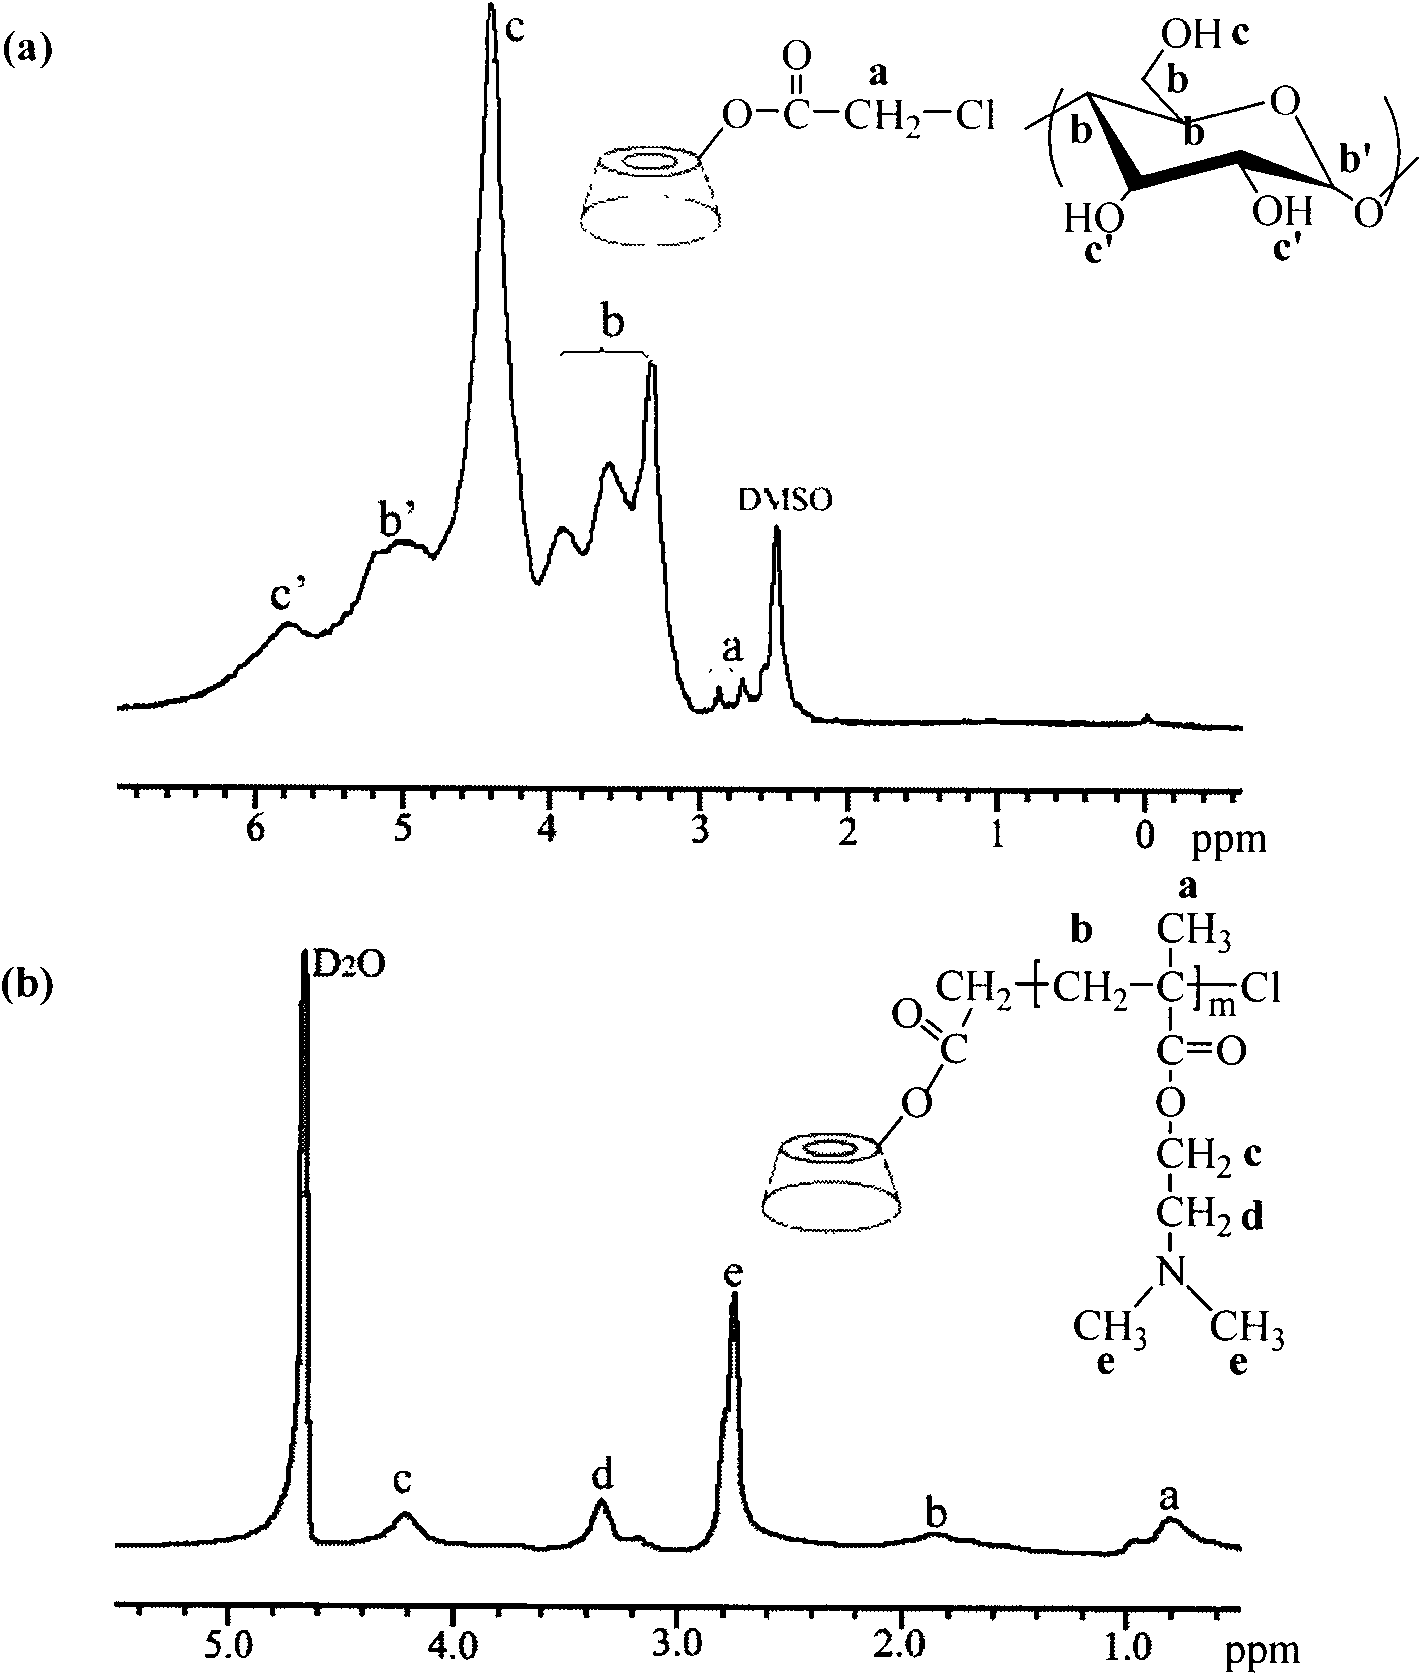 Microgel based on cyclodextrins and preparation method thereof